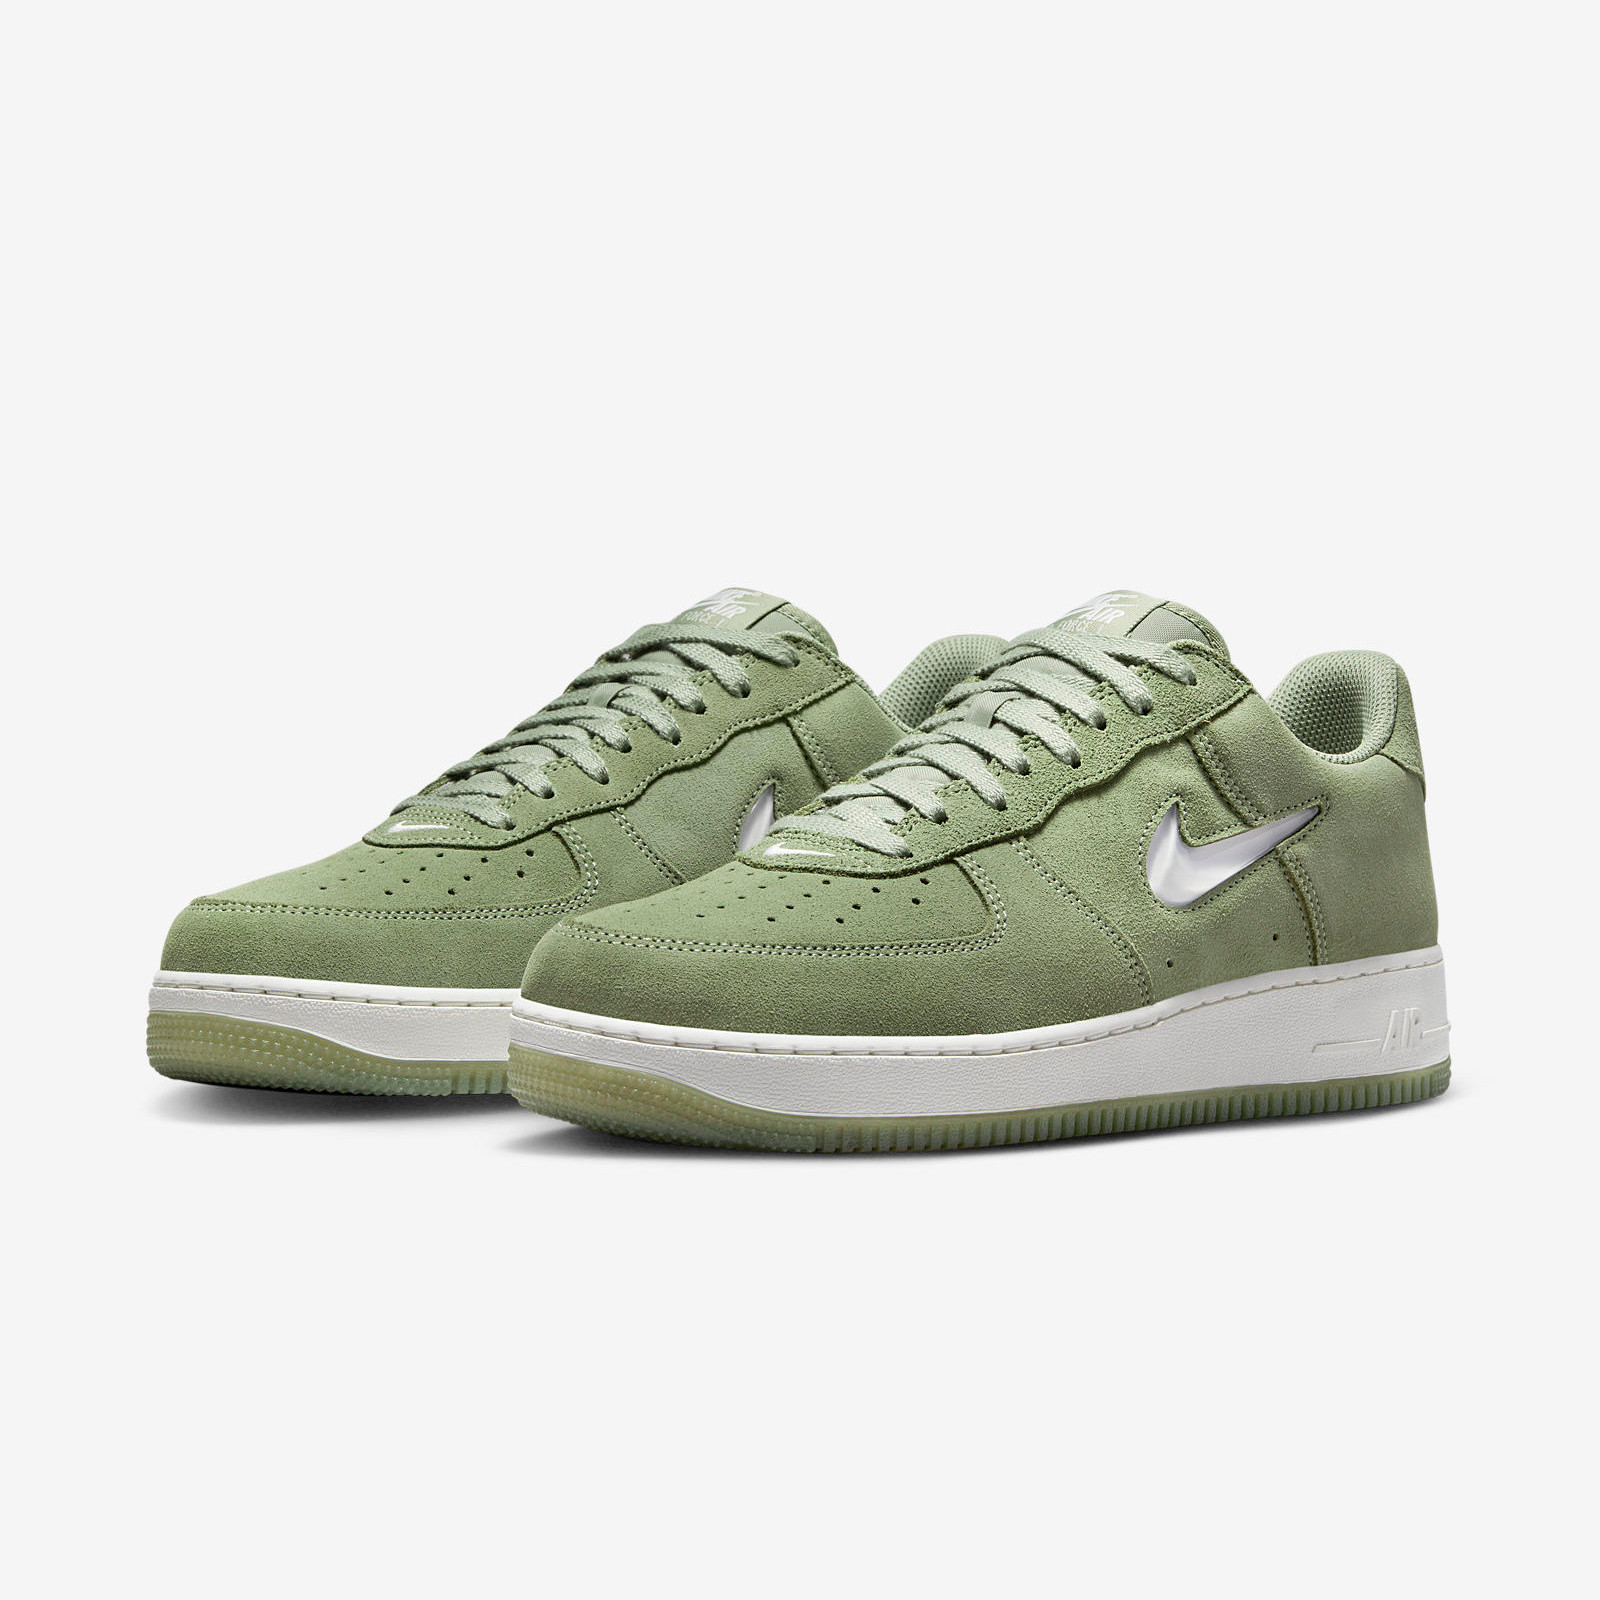 Nike Air Force 1
« Color of the Month »